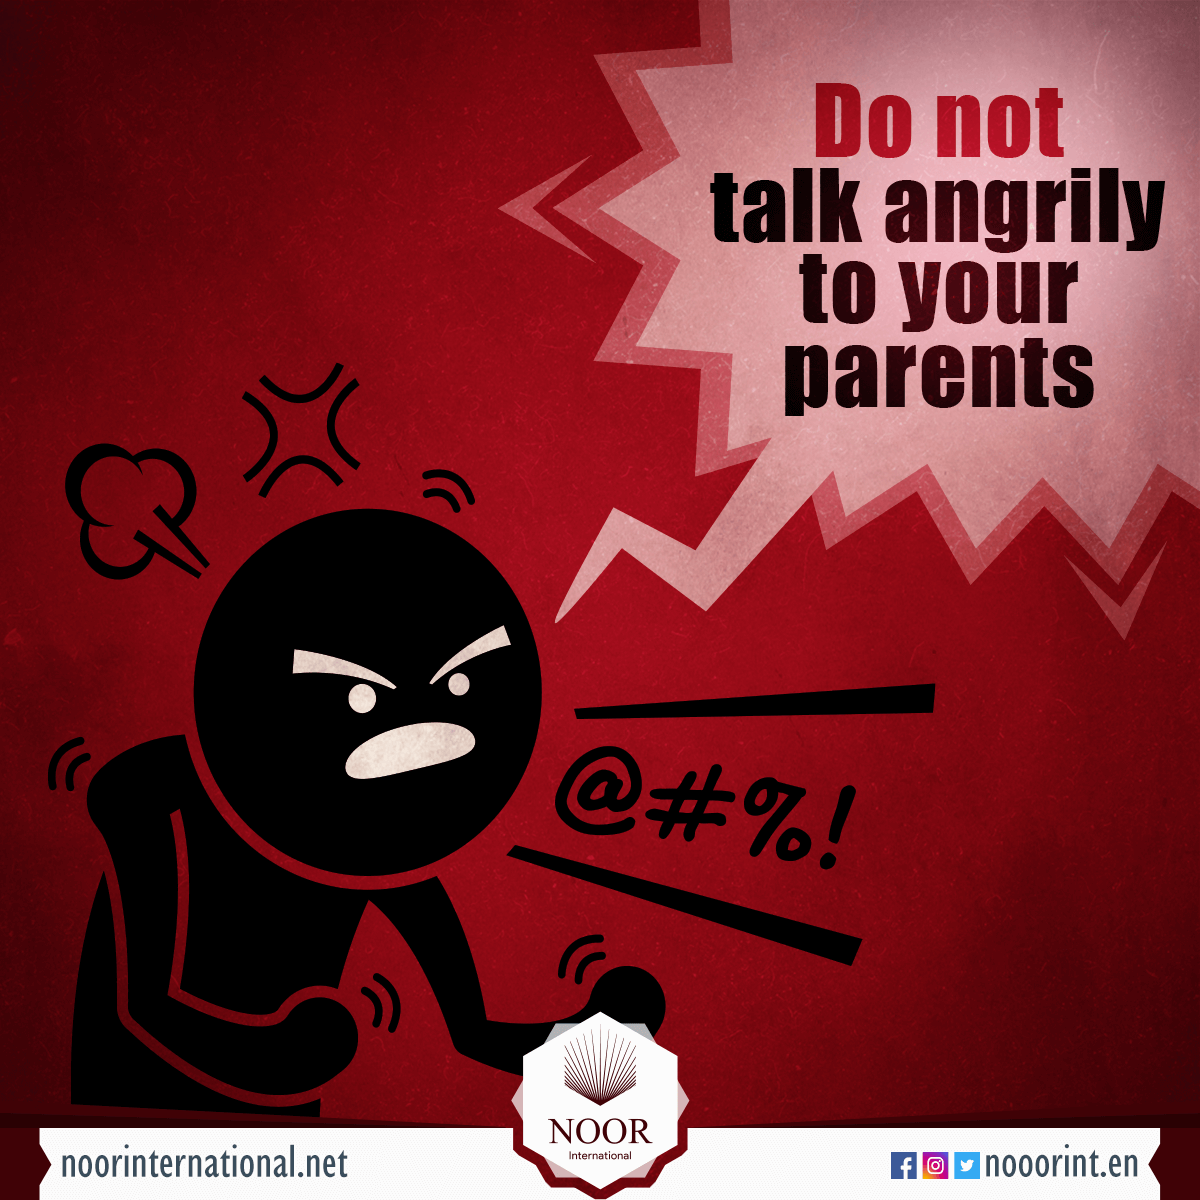 Do not talk angrily to your parents